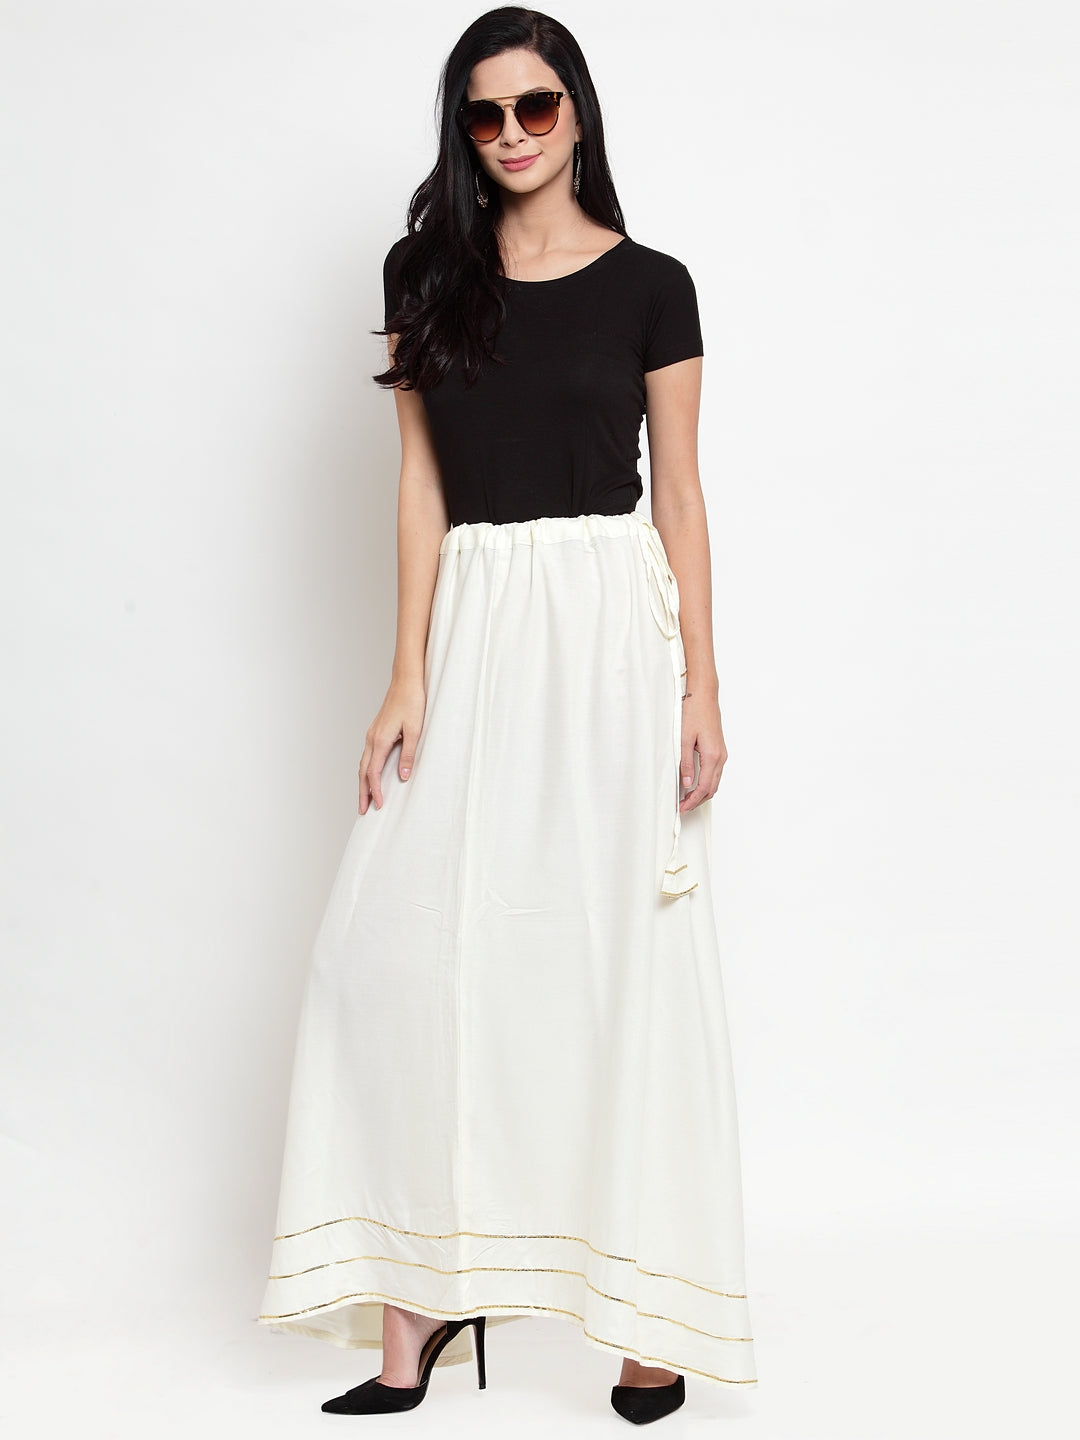 Women's Off-White Gotta Patti Solid Rayon Skirt - Wahe-NOOR